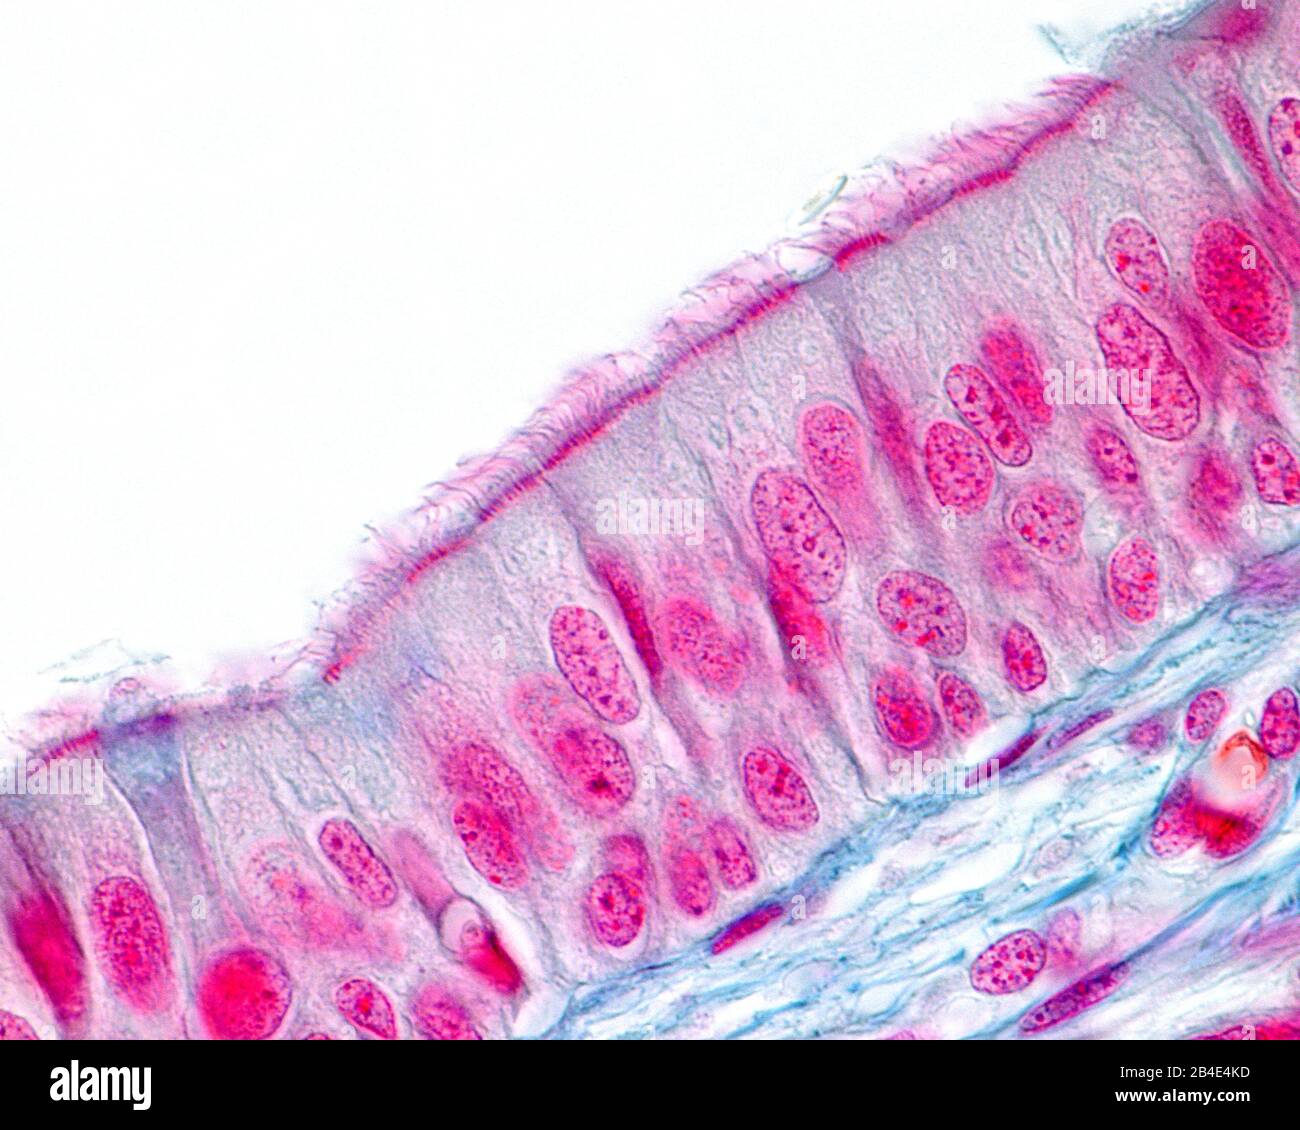 Respiratory prismatic ciliated pseudostratified epithelium. The apical border of the epithelium has a layer of cilia supported in their basal bodies. Stock Photo